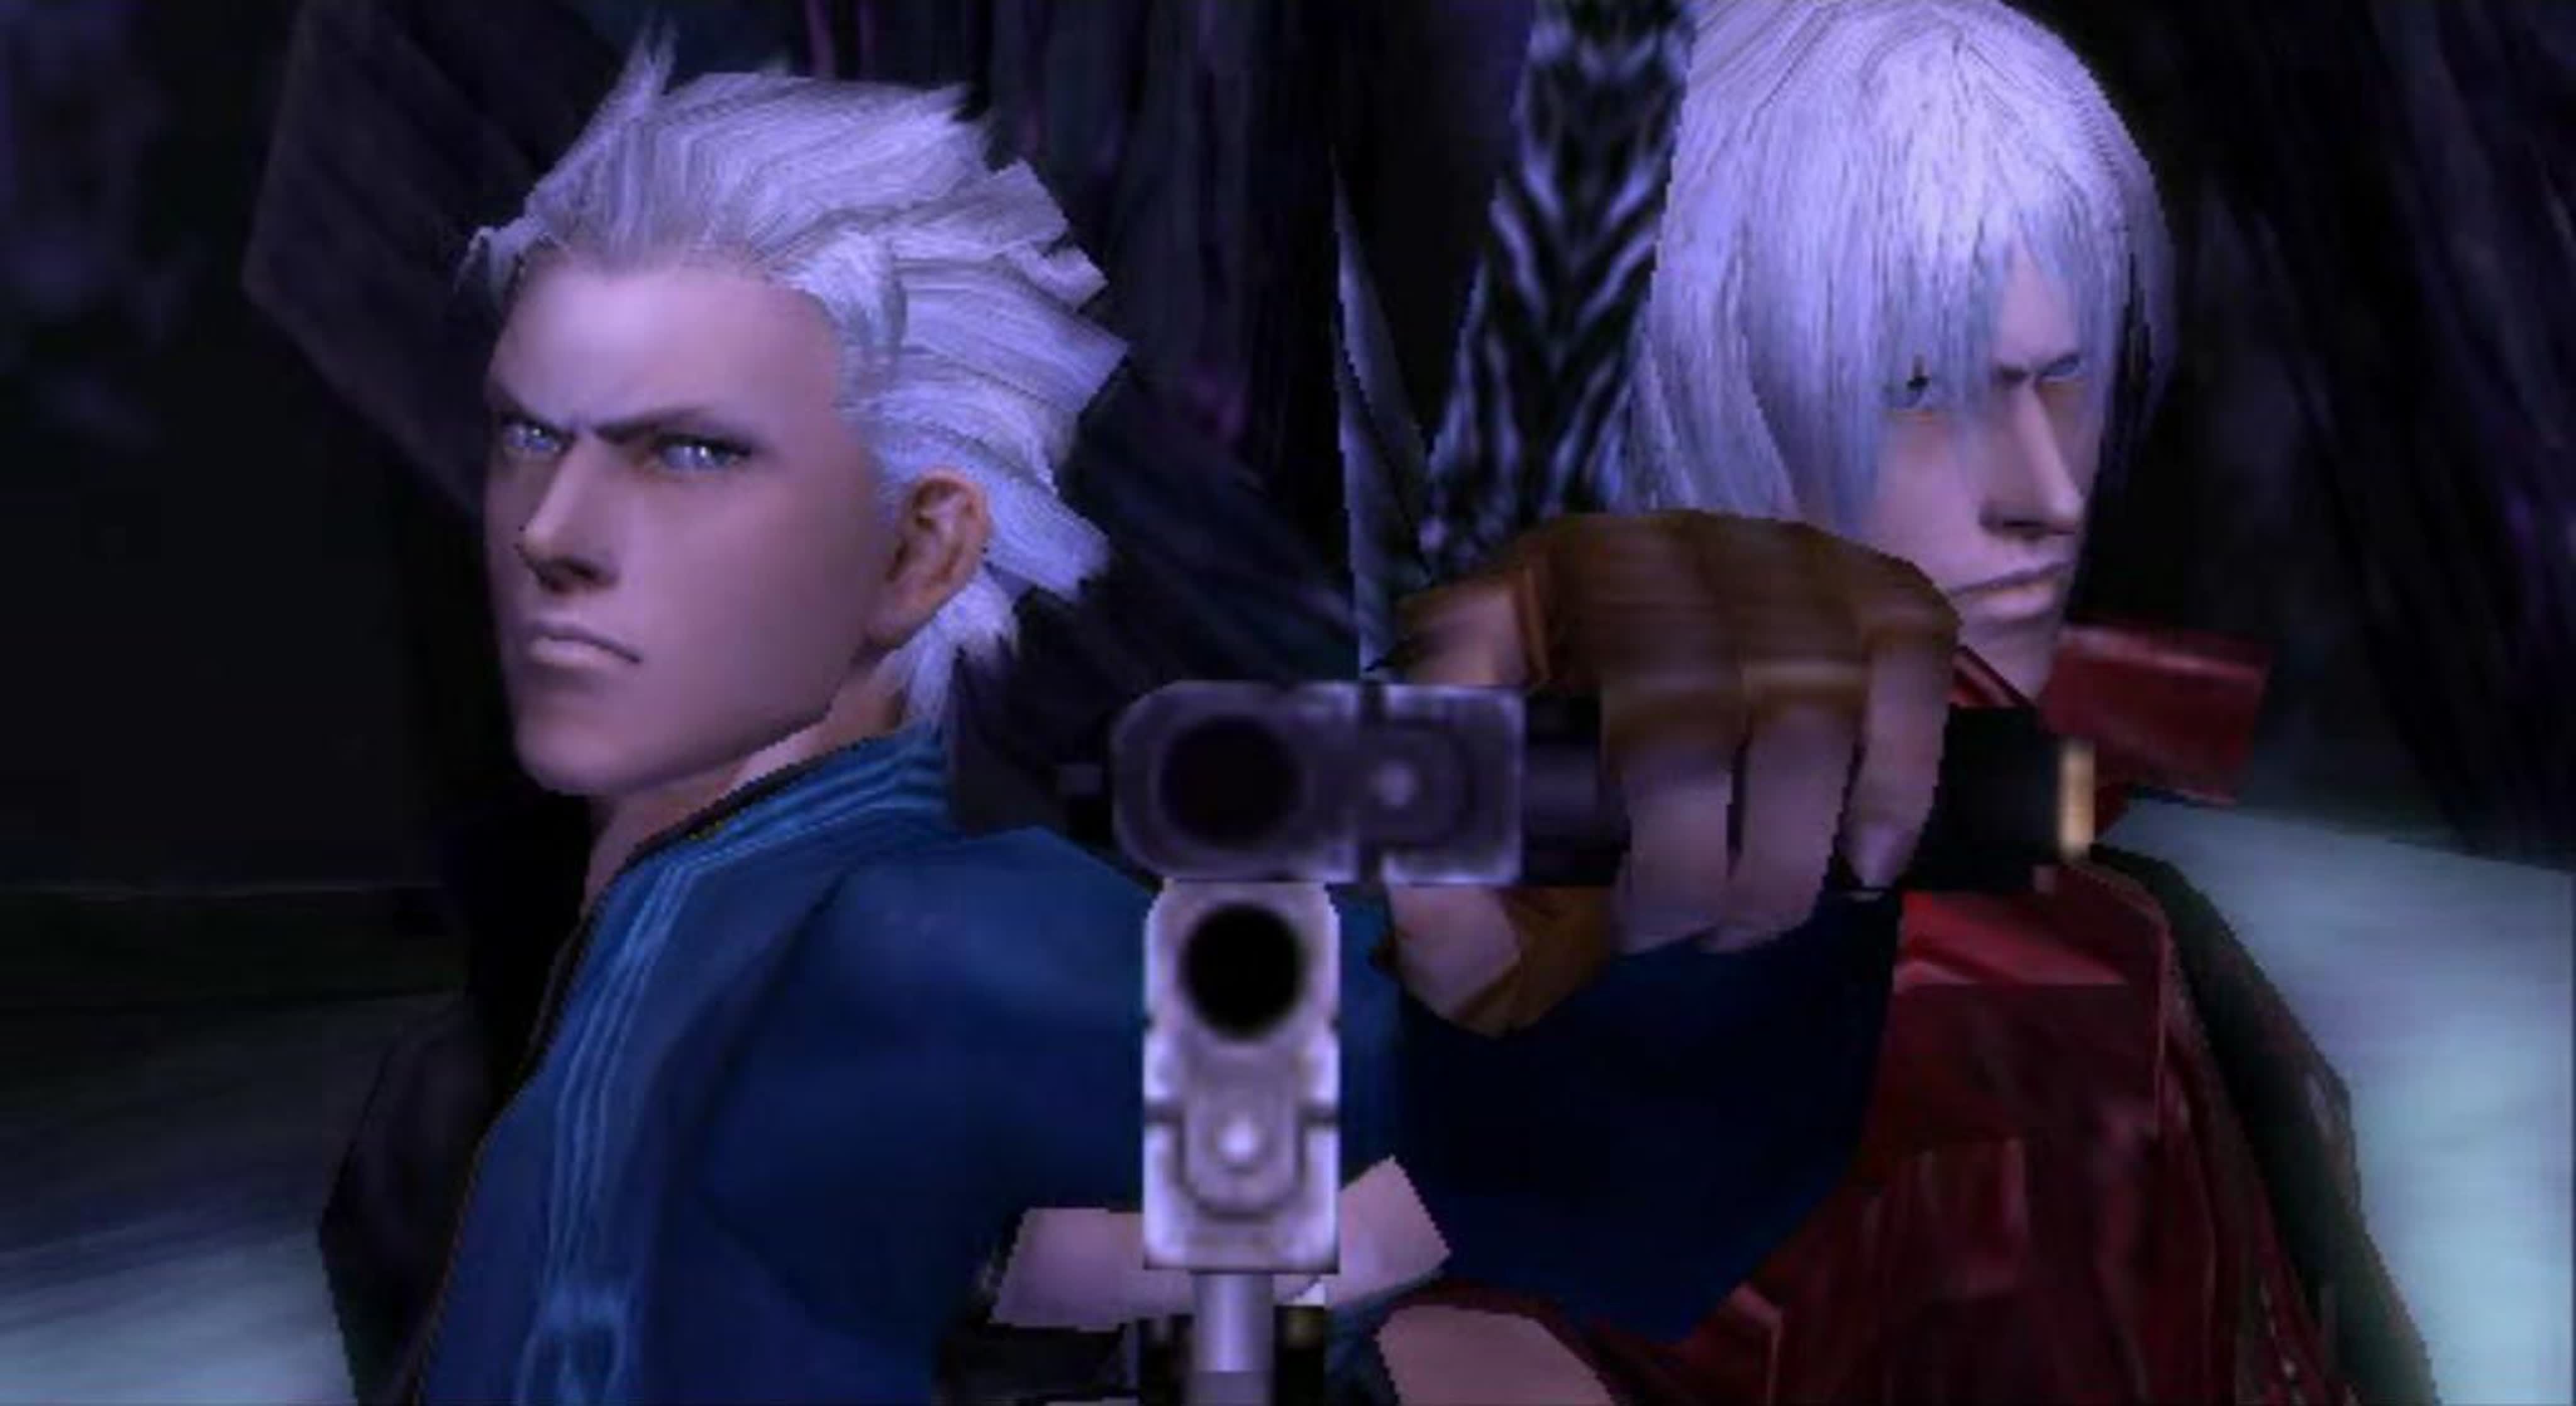 Devil May Cry's Dante and his many cameos in other games